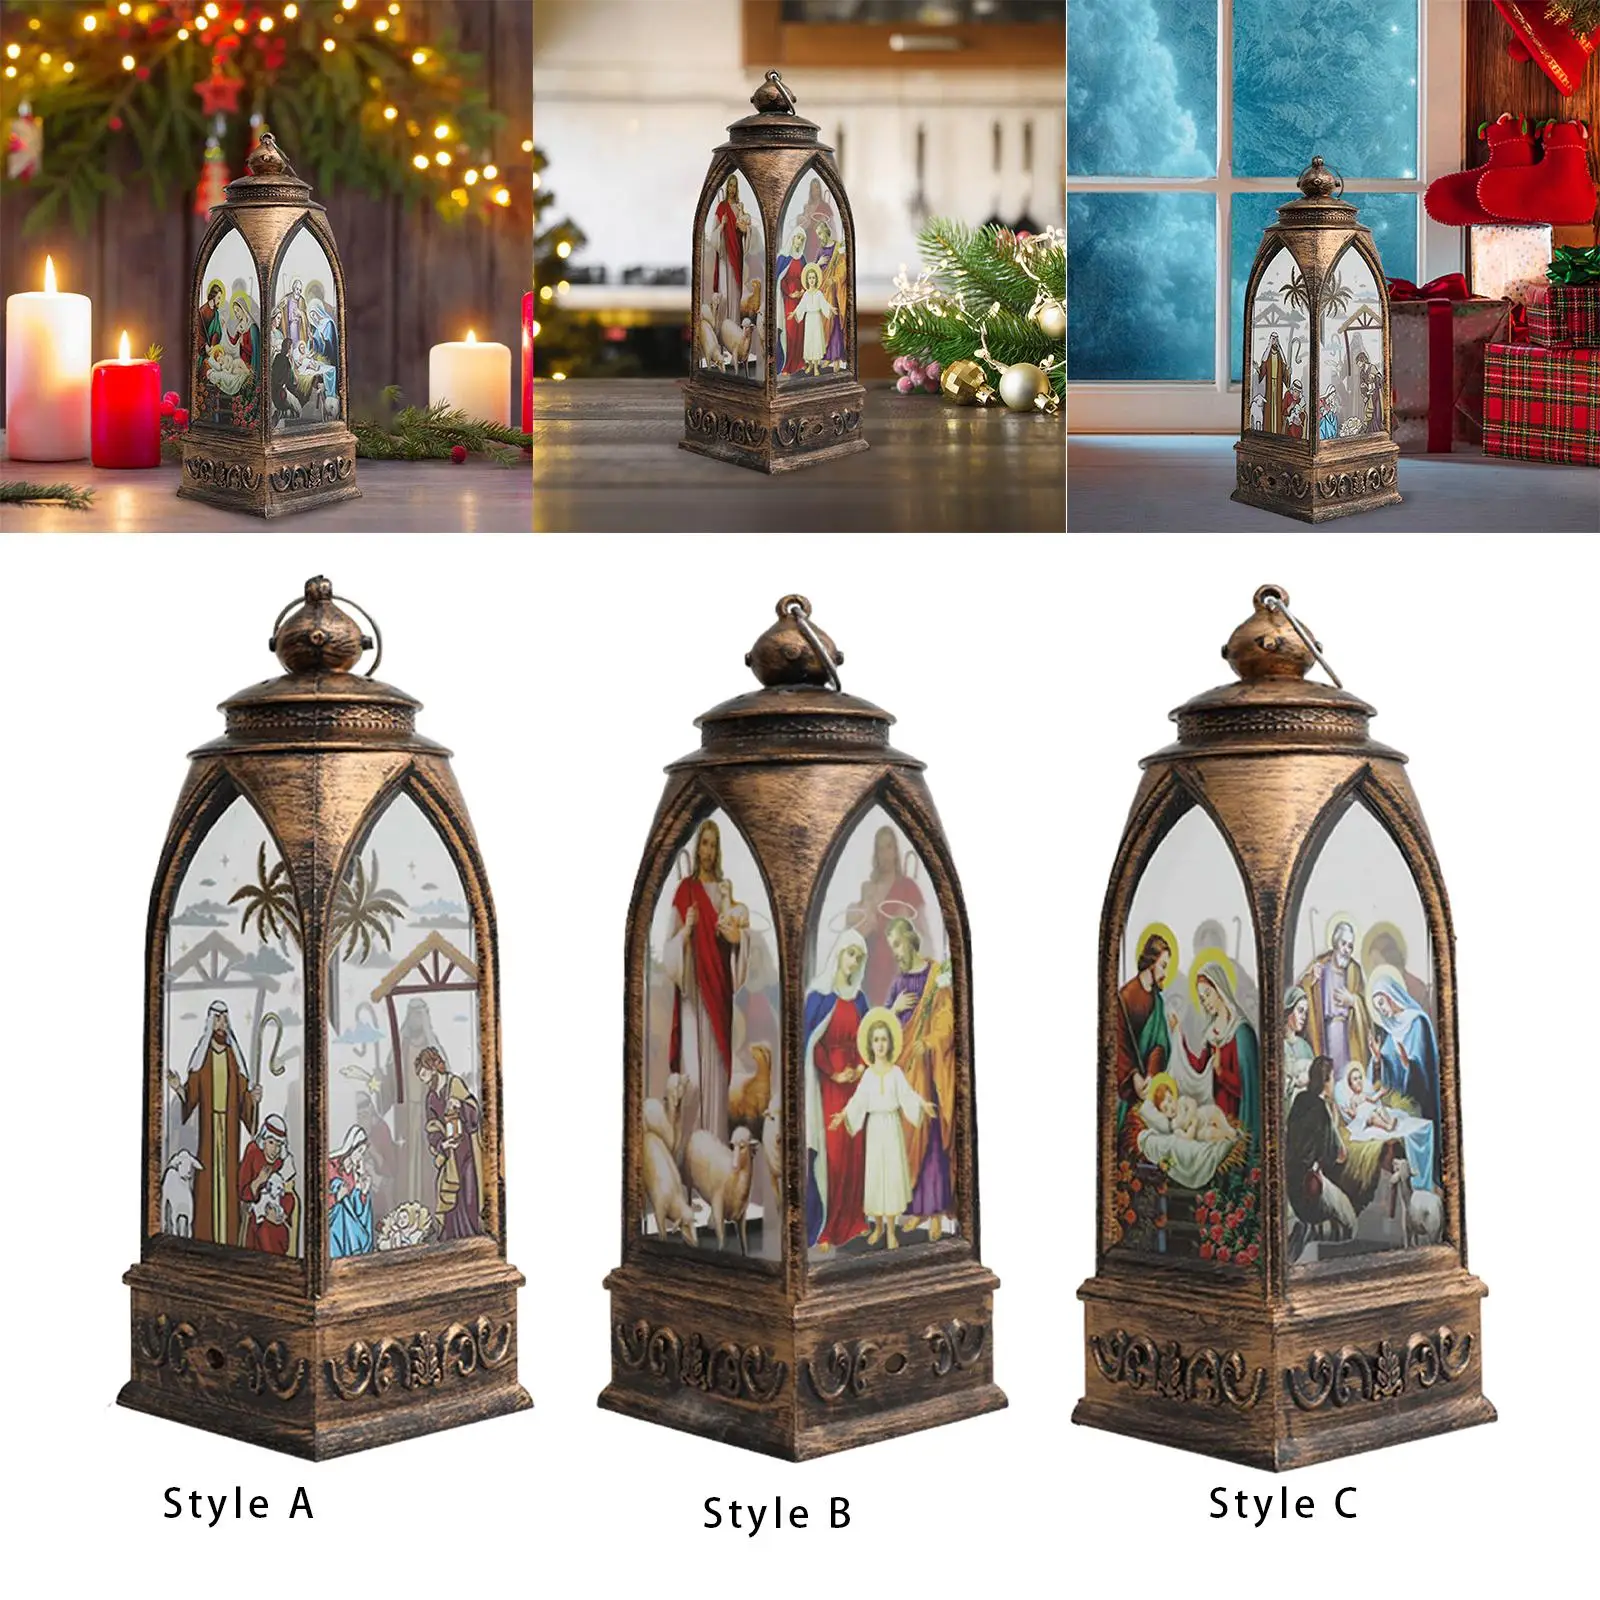 LED Christmas Lantern Glittering Festival Decoration Gift Crafts Home Decoration Christmas Ornament for Party Front Door Xmas